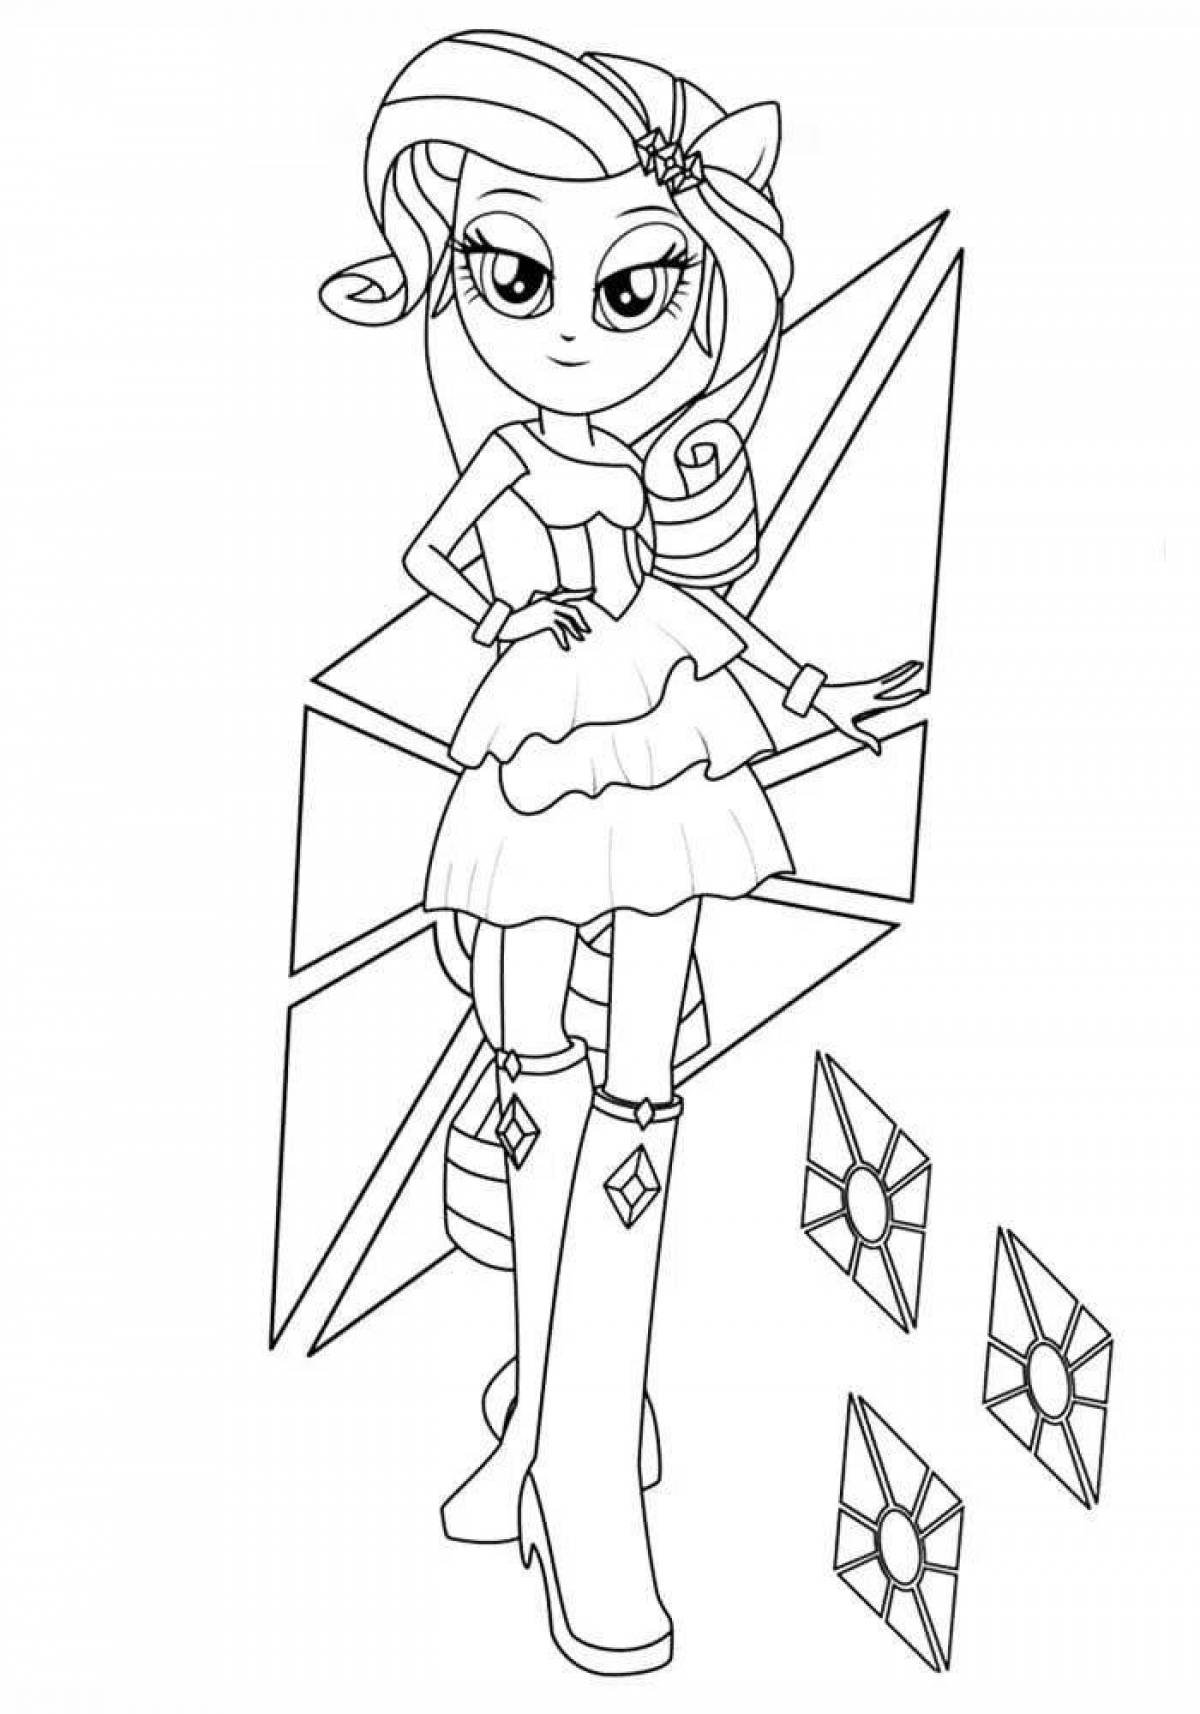 Wonderful equestria coloring page